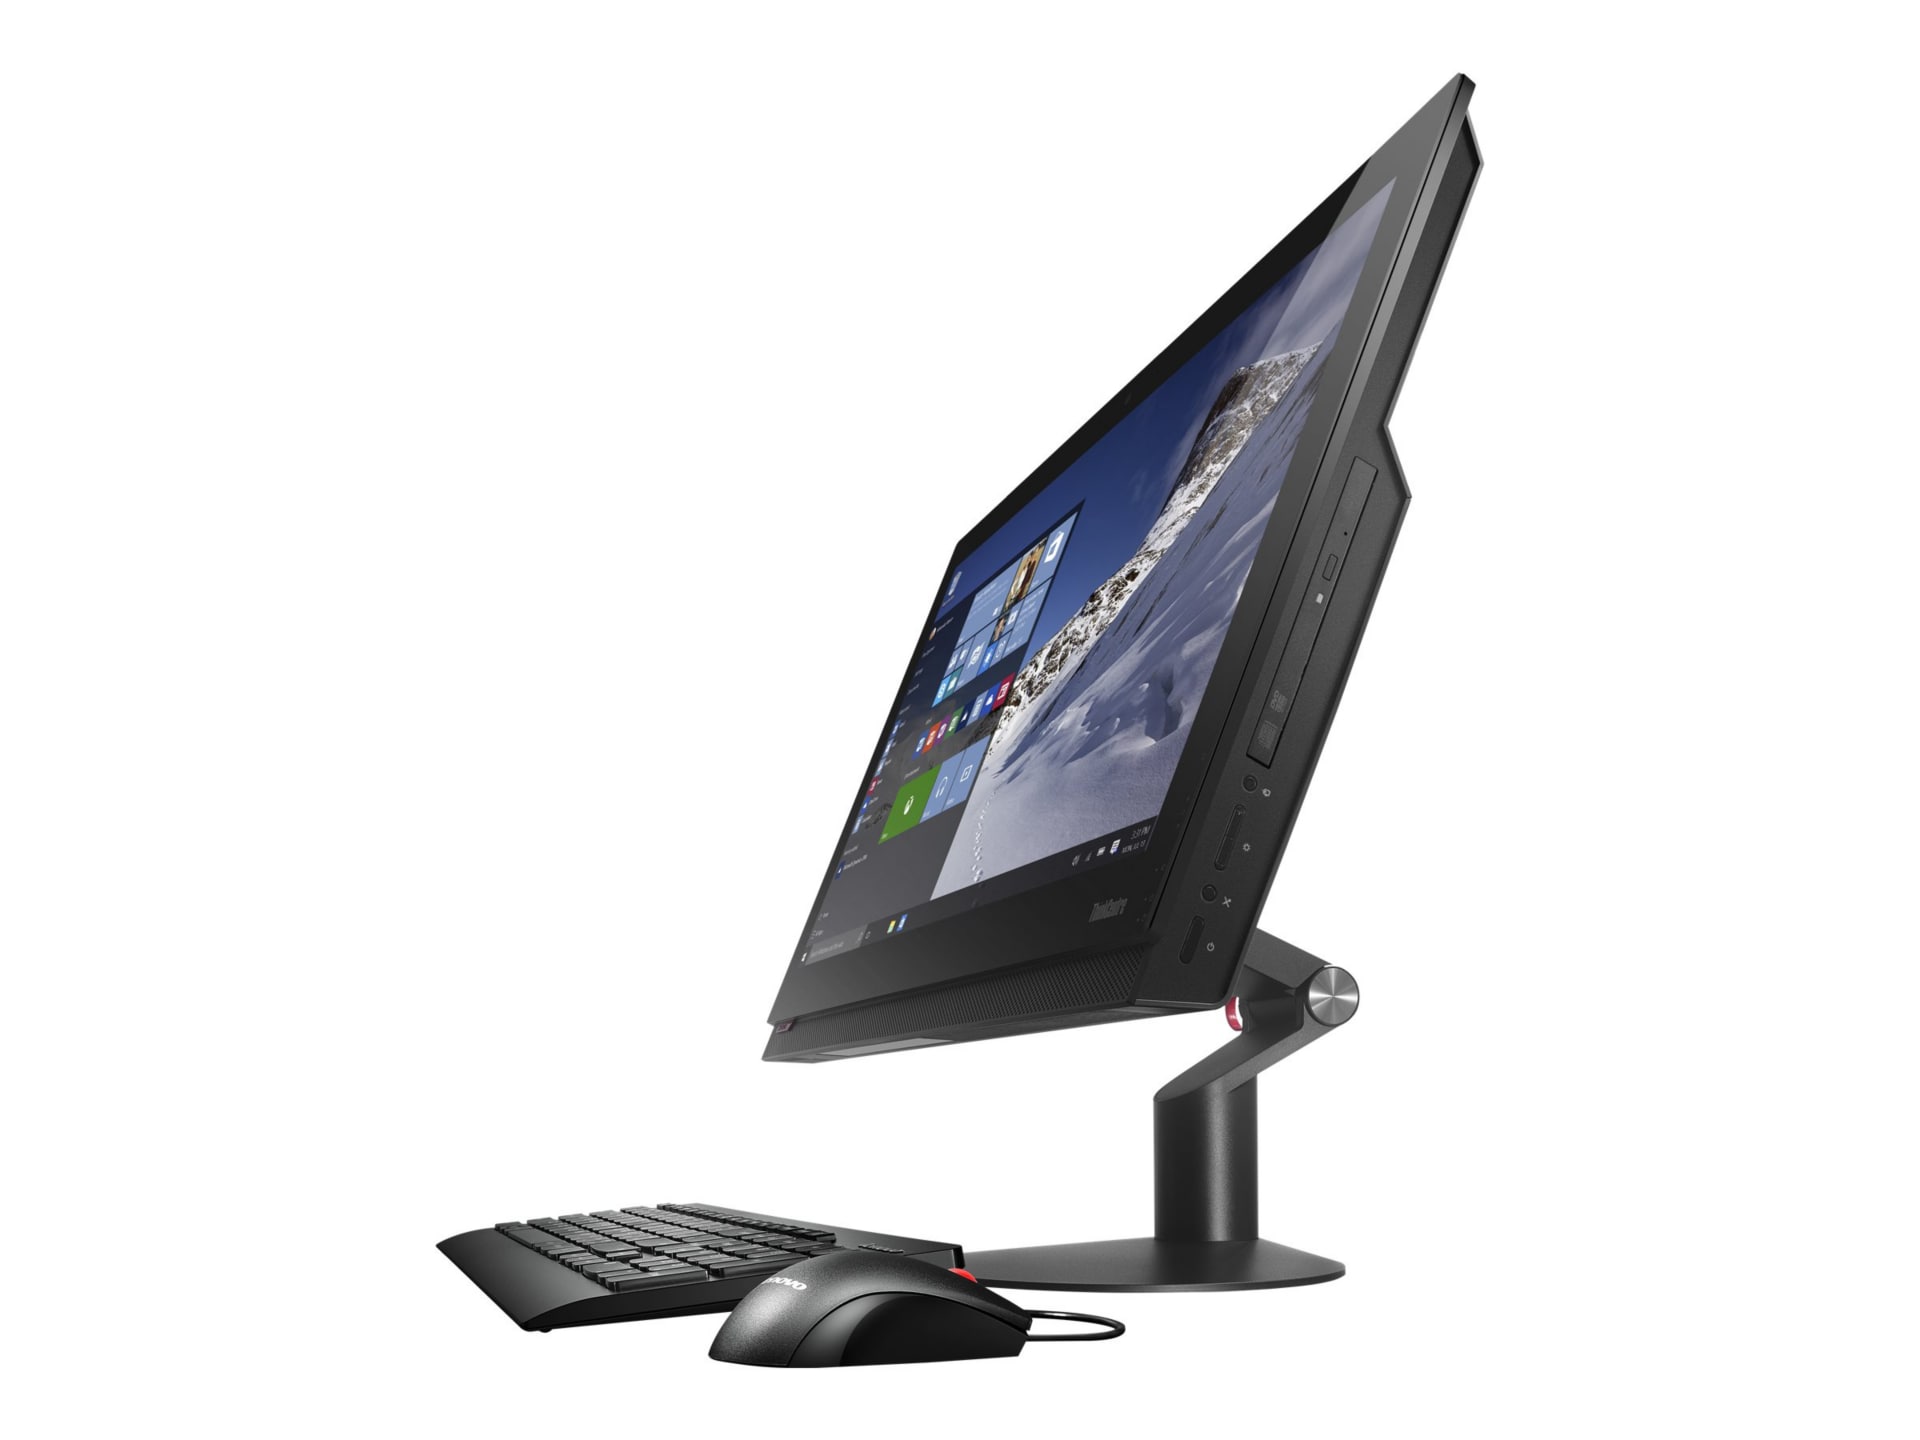 Lenovo ThinkCentre M910z - all-in-one - Core i5 7500 3.4 GHz - 8 GB - 256 GB - LED 23.8" - English - US